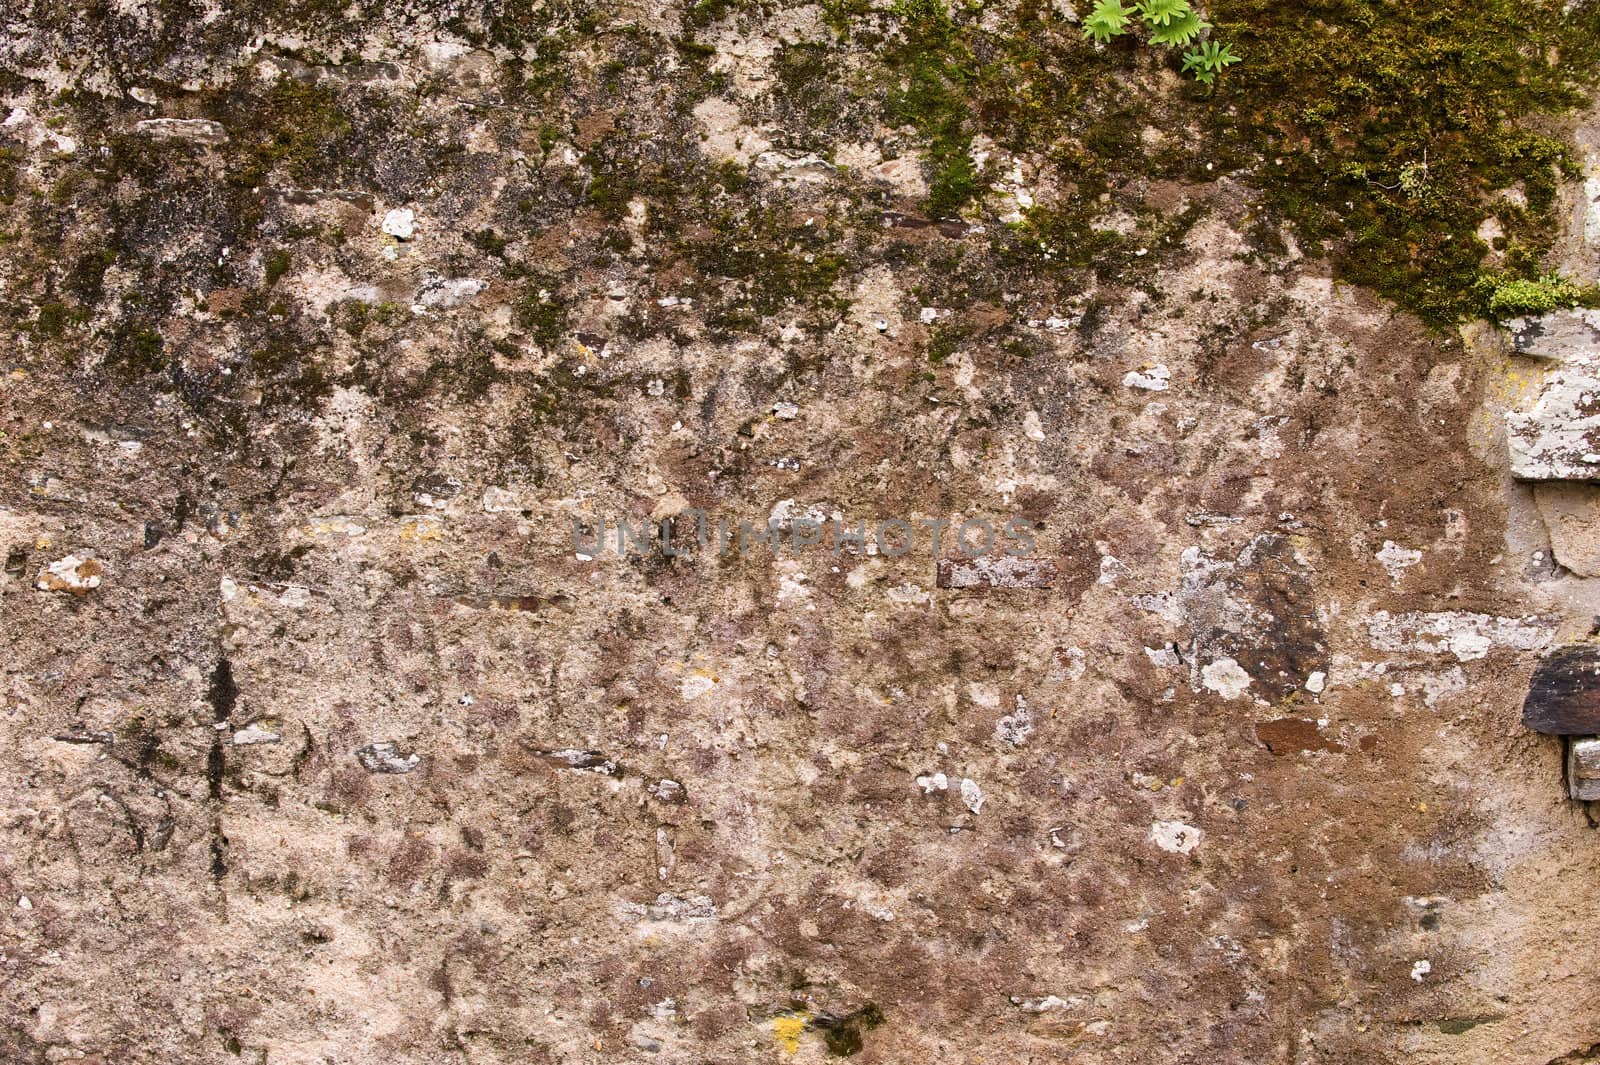 Background texture of an old wall 